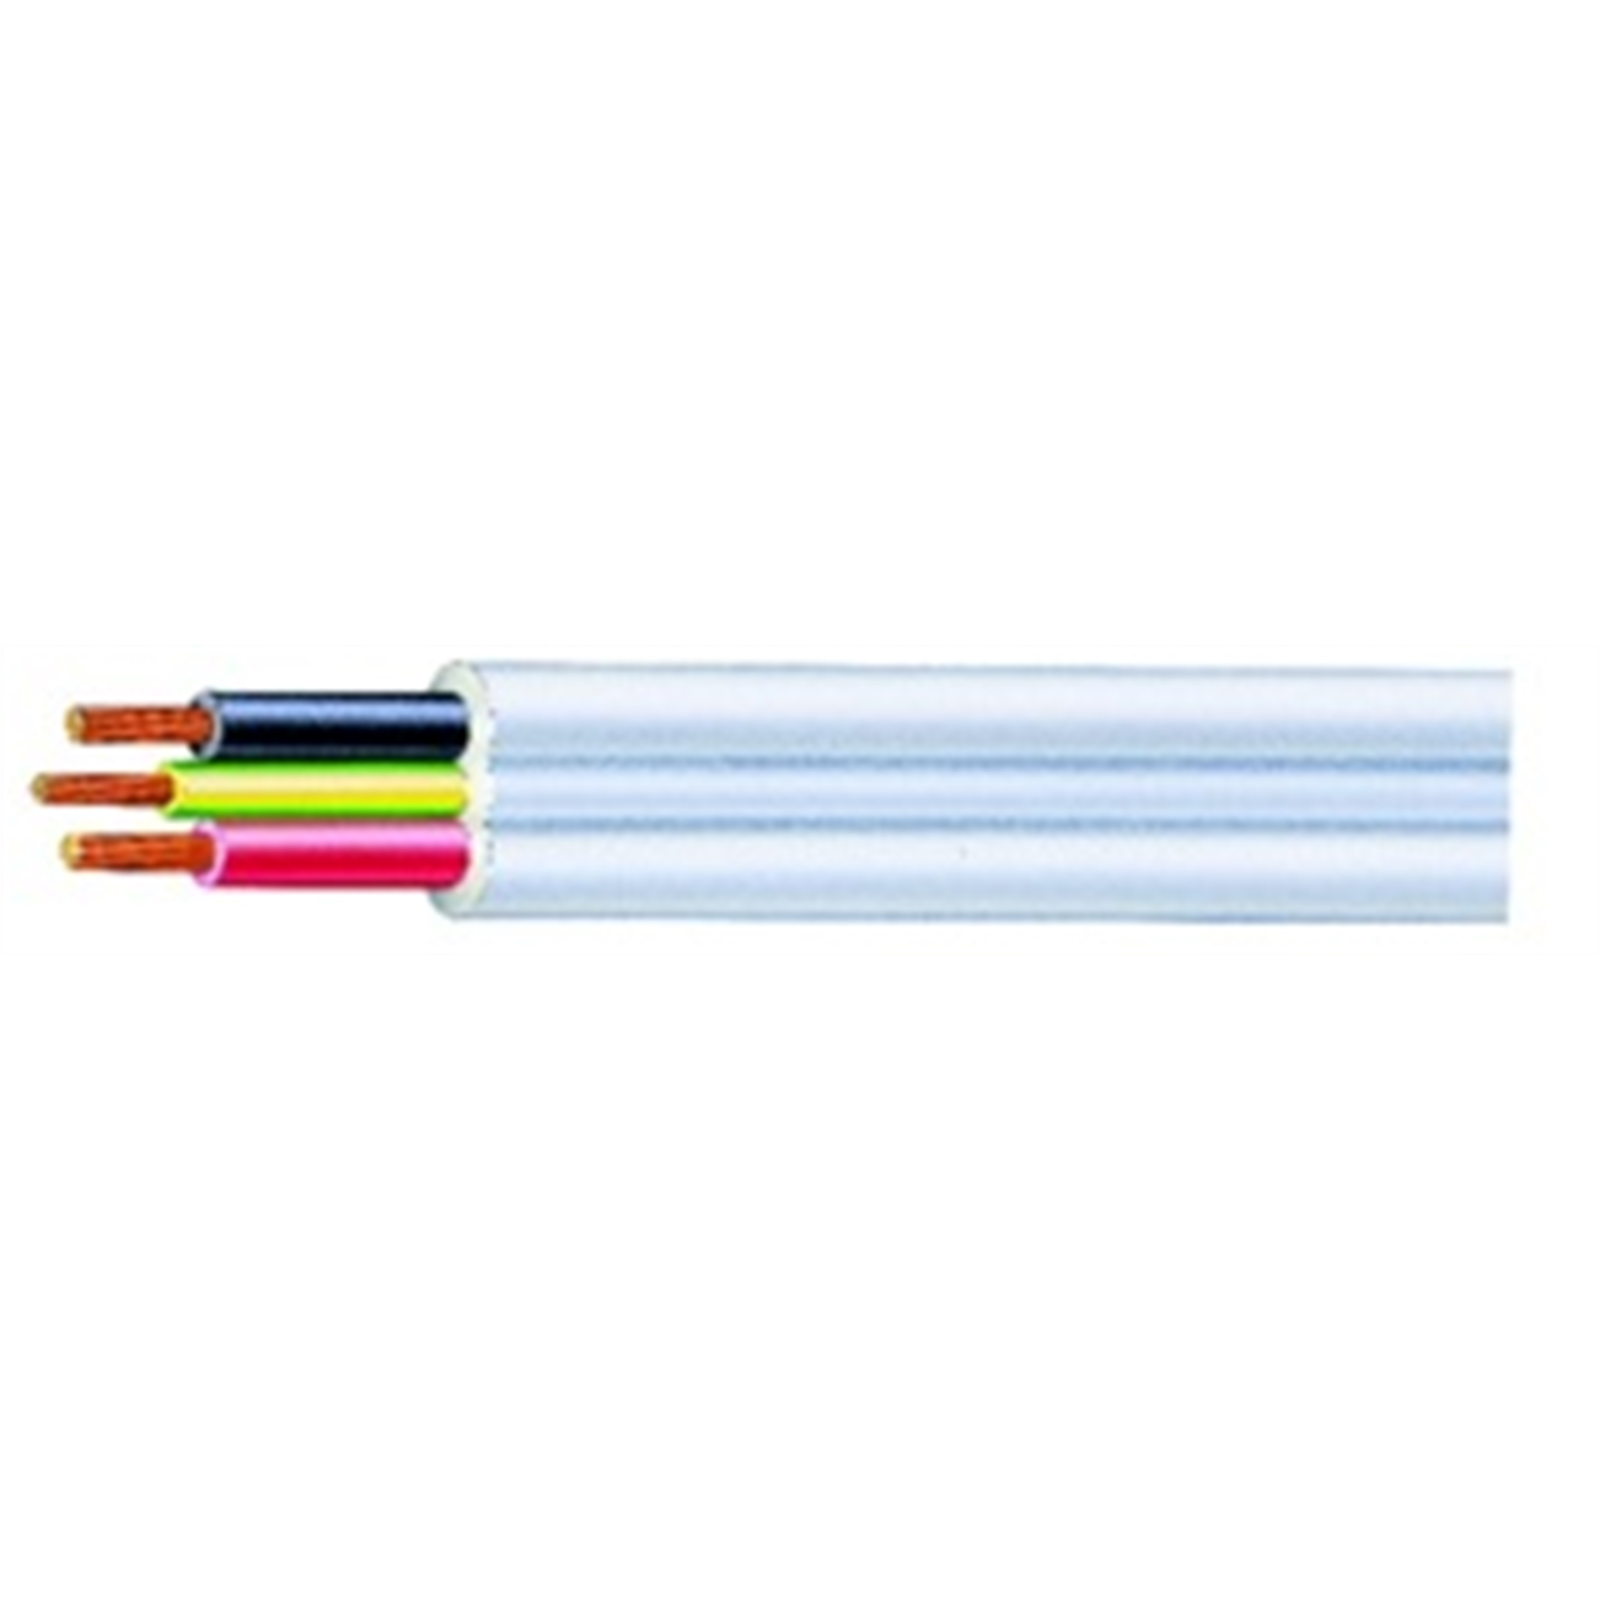 Cable Elect Twin&earth Flt P/m 1mm 1/1.13sol Cncp02aa002wvaa